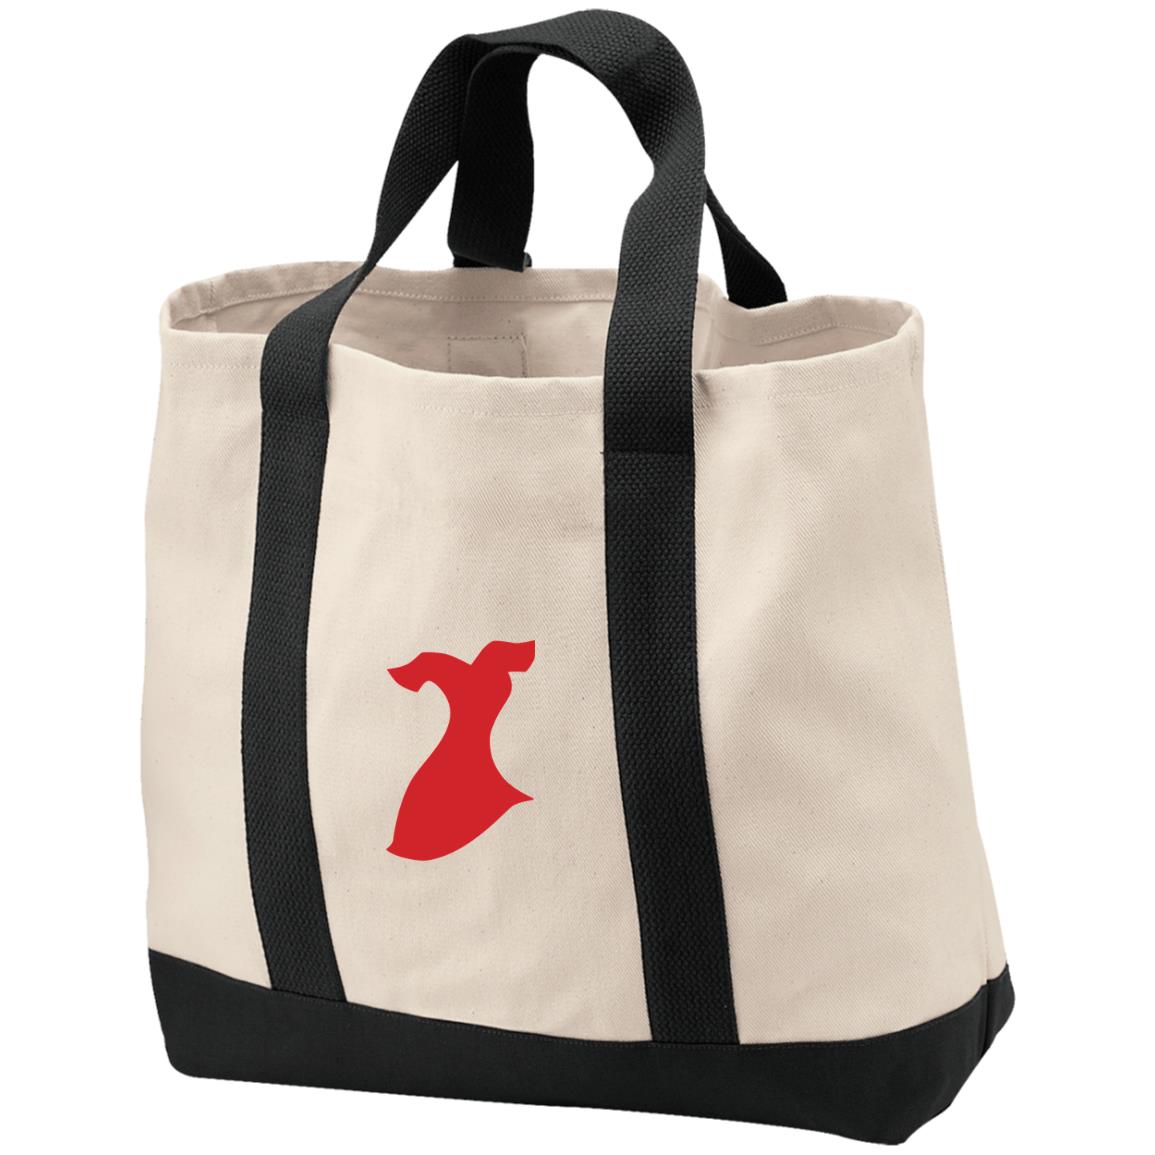 Go Red Tote